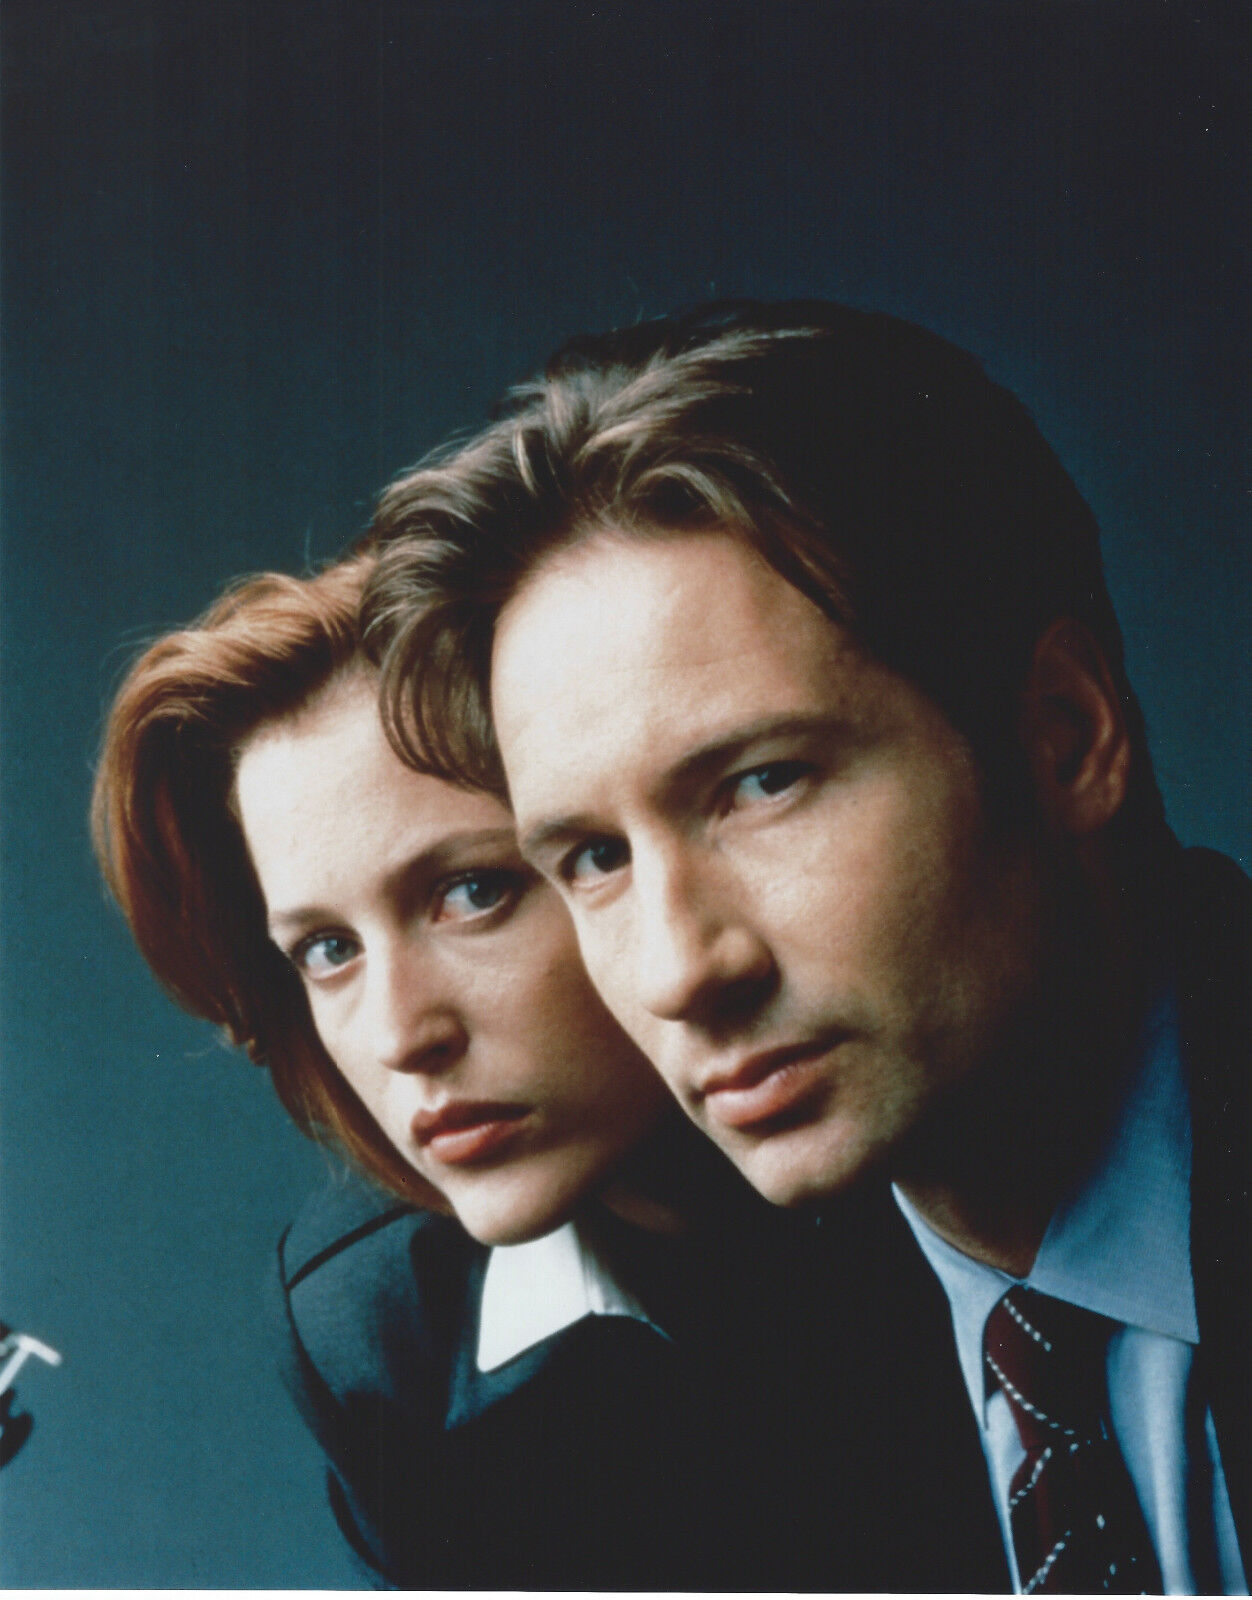 X-FILES 8 X 10 PHOTO WITH ULTRA PRO TOPLOADER